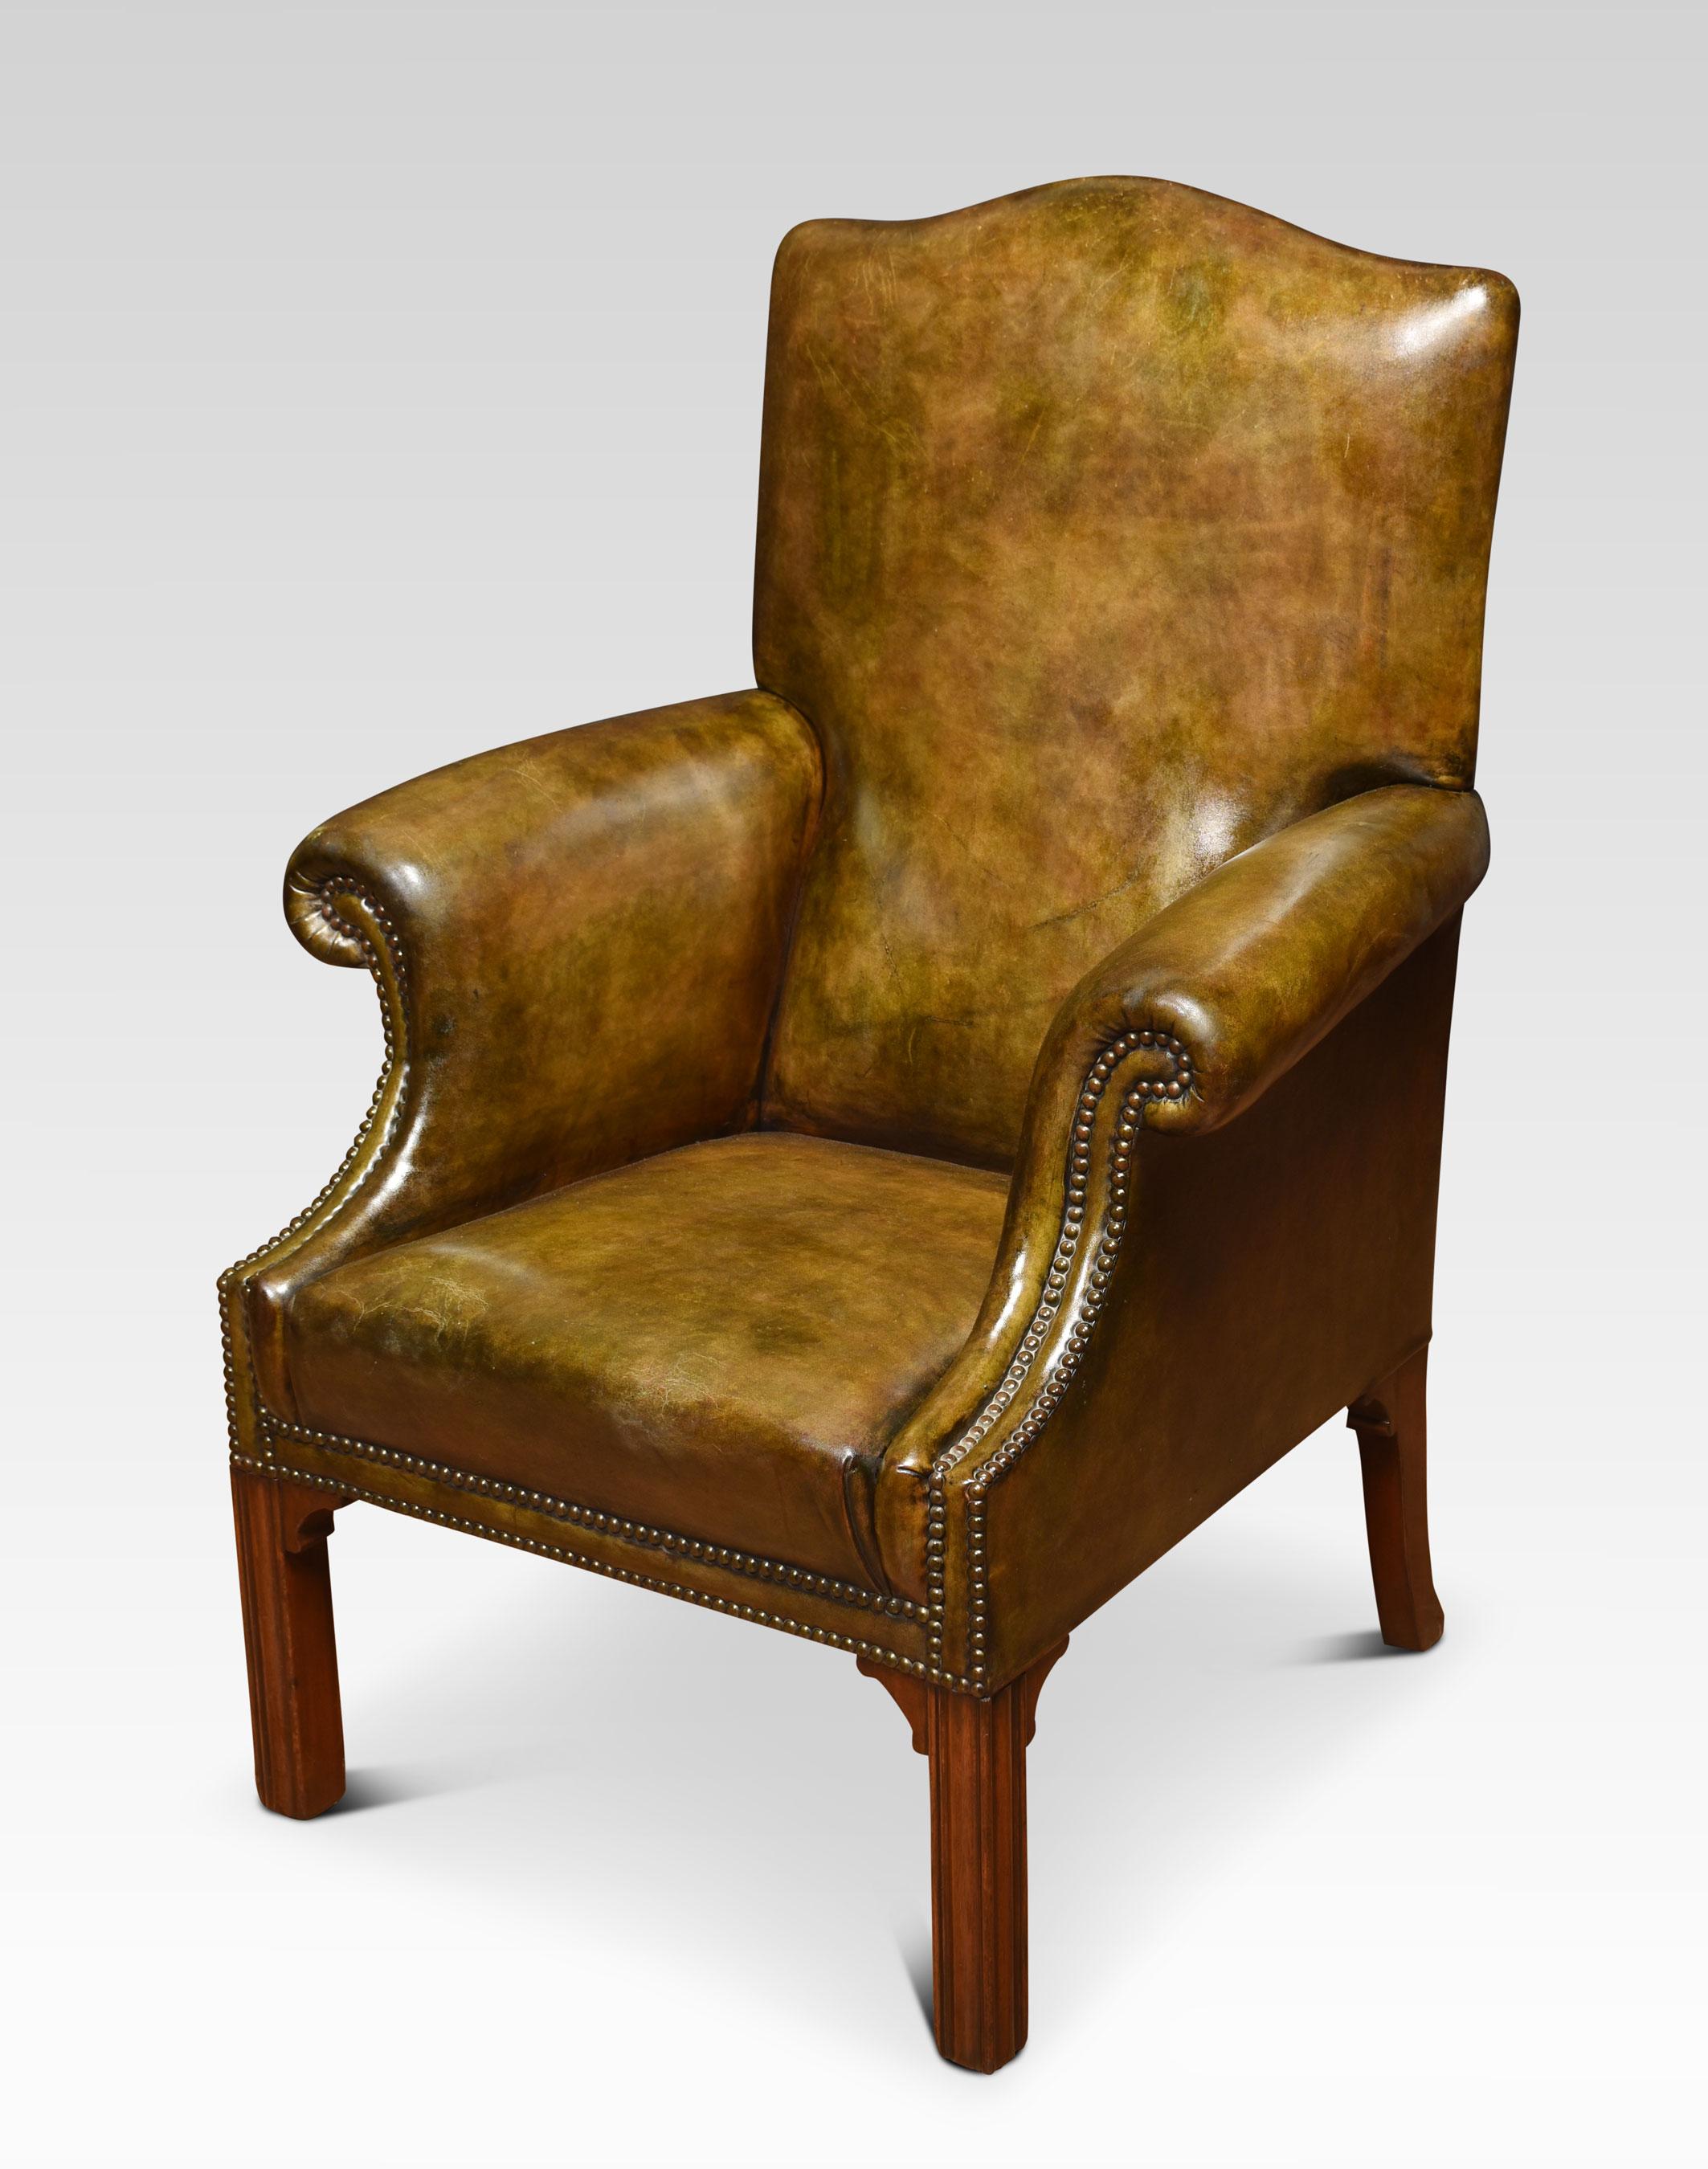 Mahogany framed armchair of small proportions, the arched top above upholstered back, arms and seat. All raised up on square supports.
Dimensions
Height 41 Inches height to seat 17 Inches
Width 29.5 Inches
Depth 27.5 Inches.